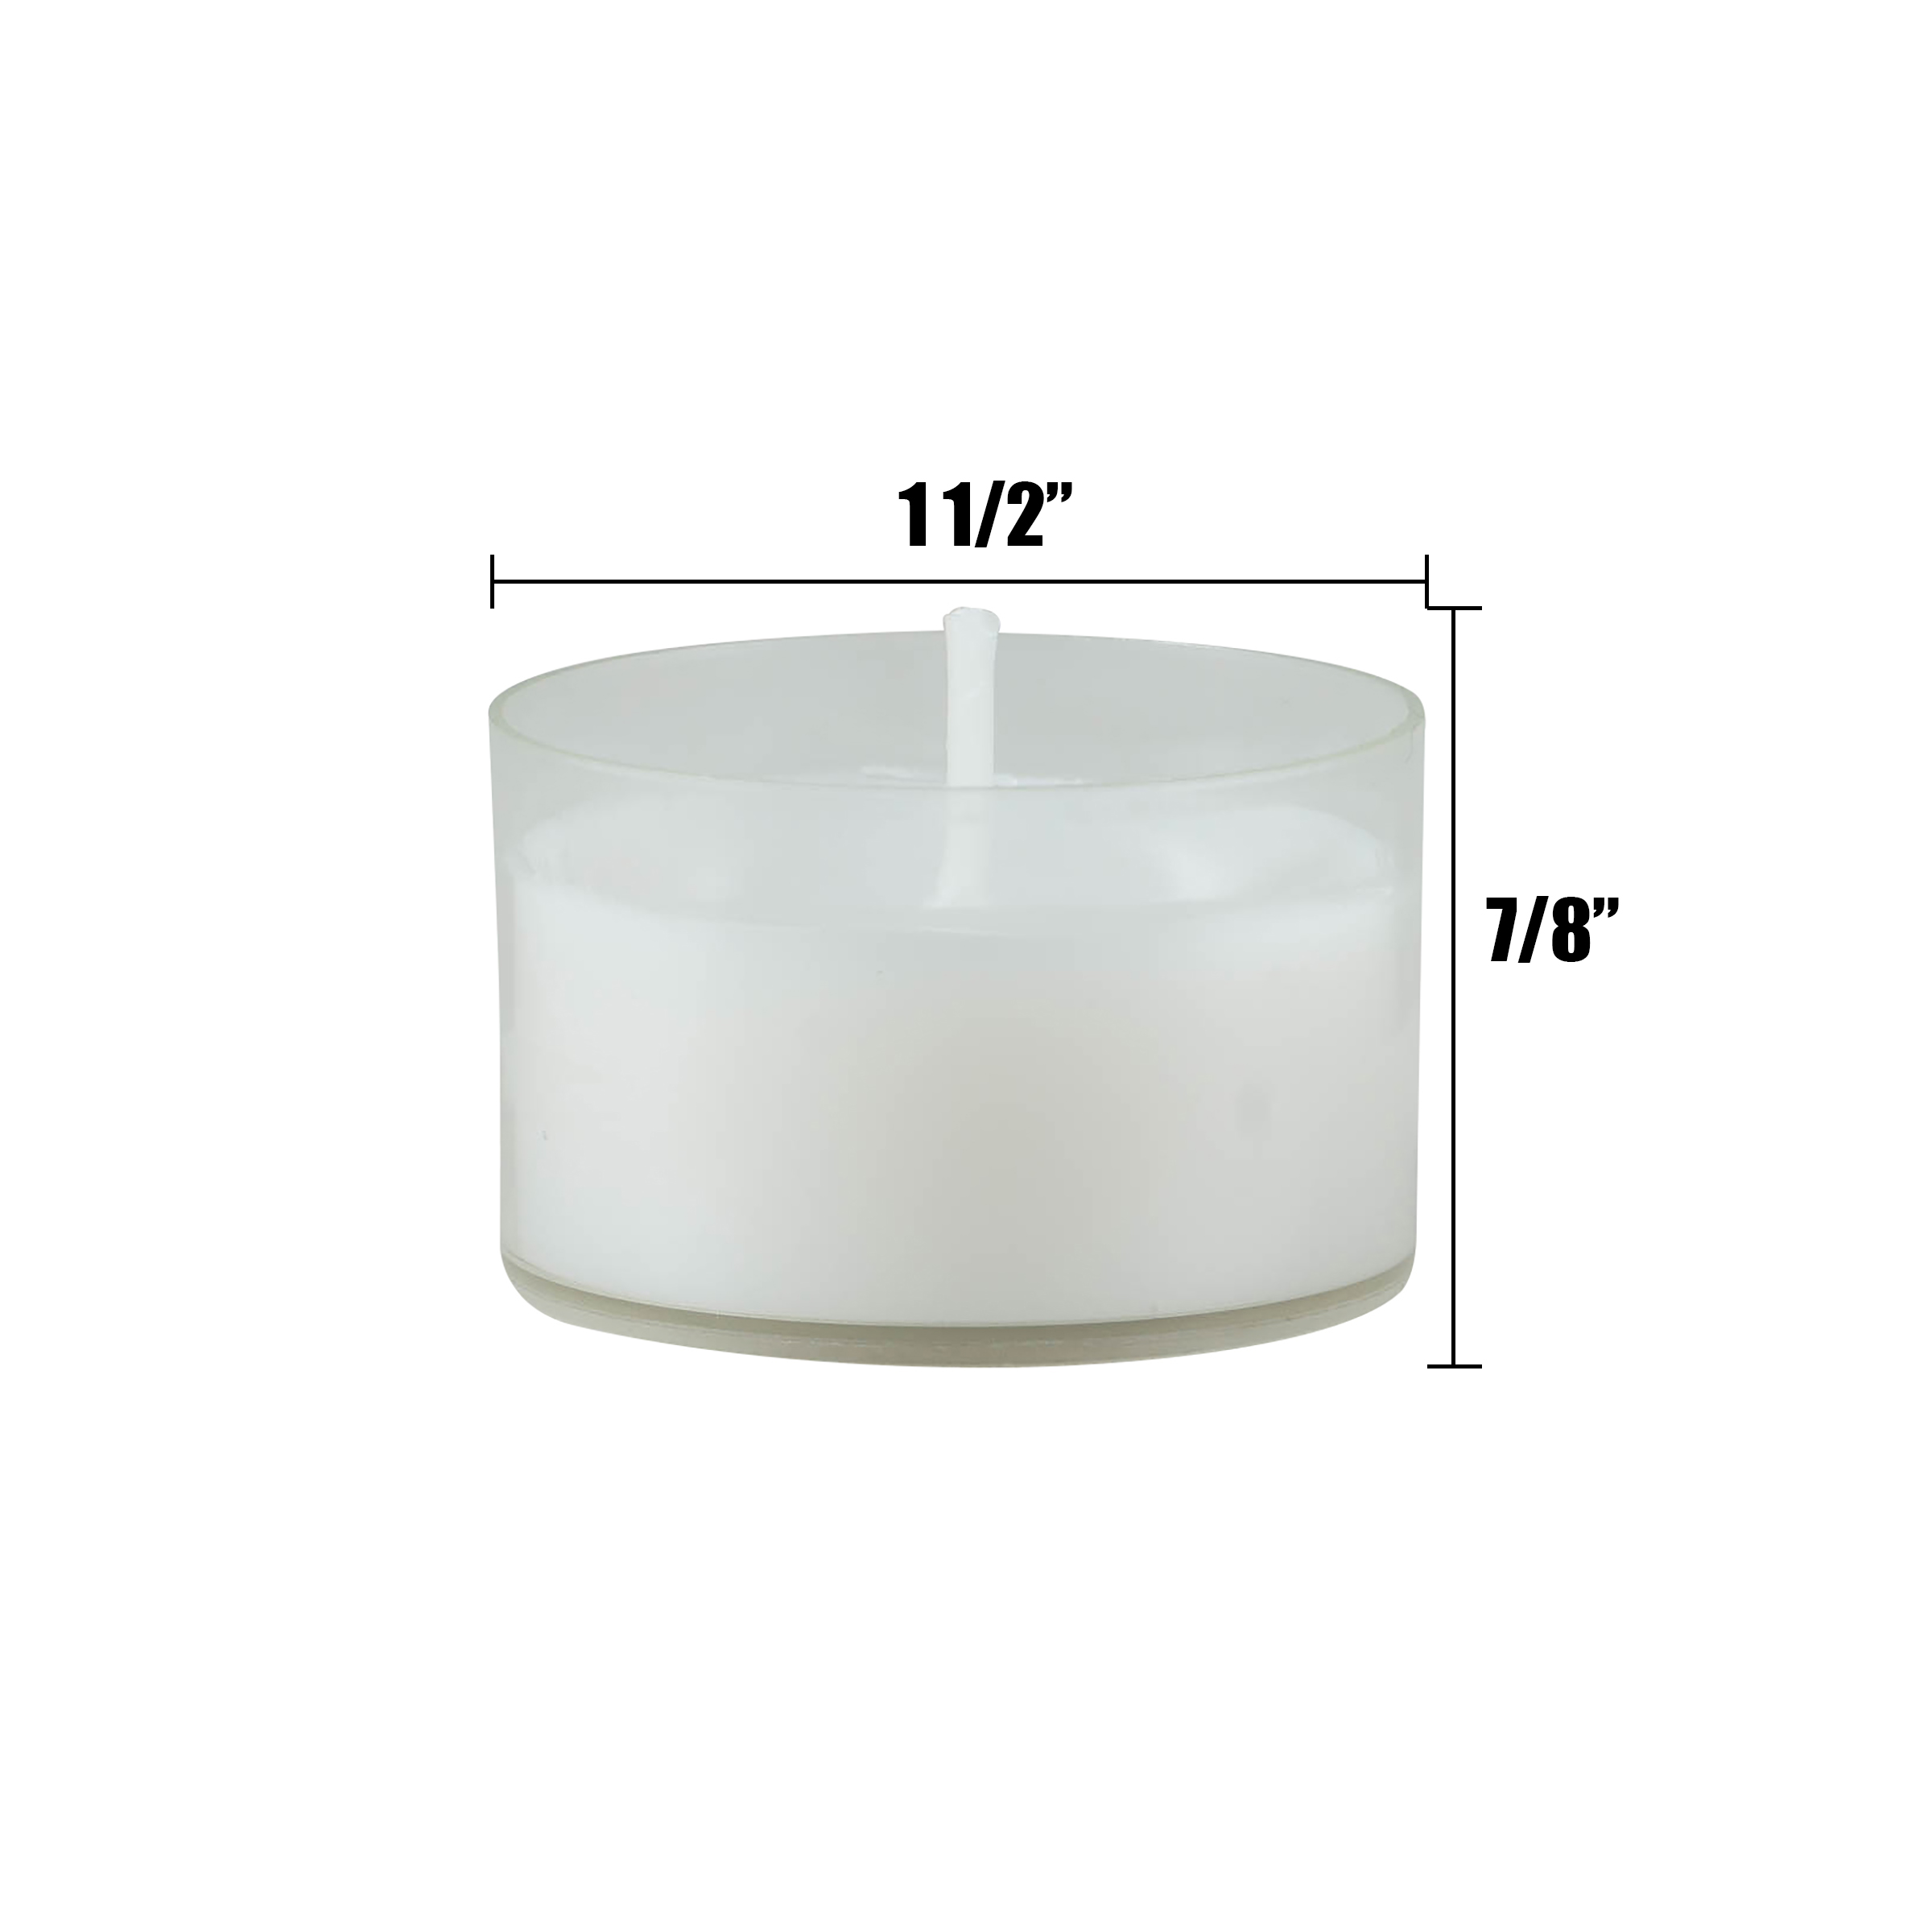 Stonebriar Unscented Long Burning Clear Cup Tealight Candles with 6-7 Hour Burn Time, 96 Pack, White - image 3 of 8